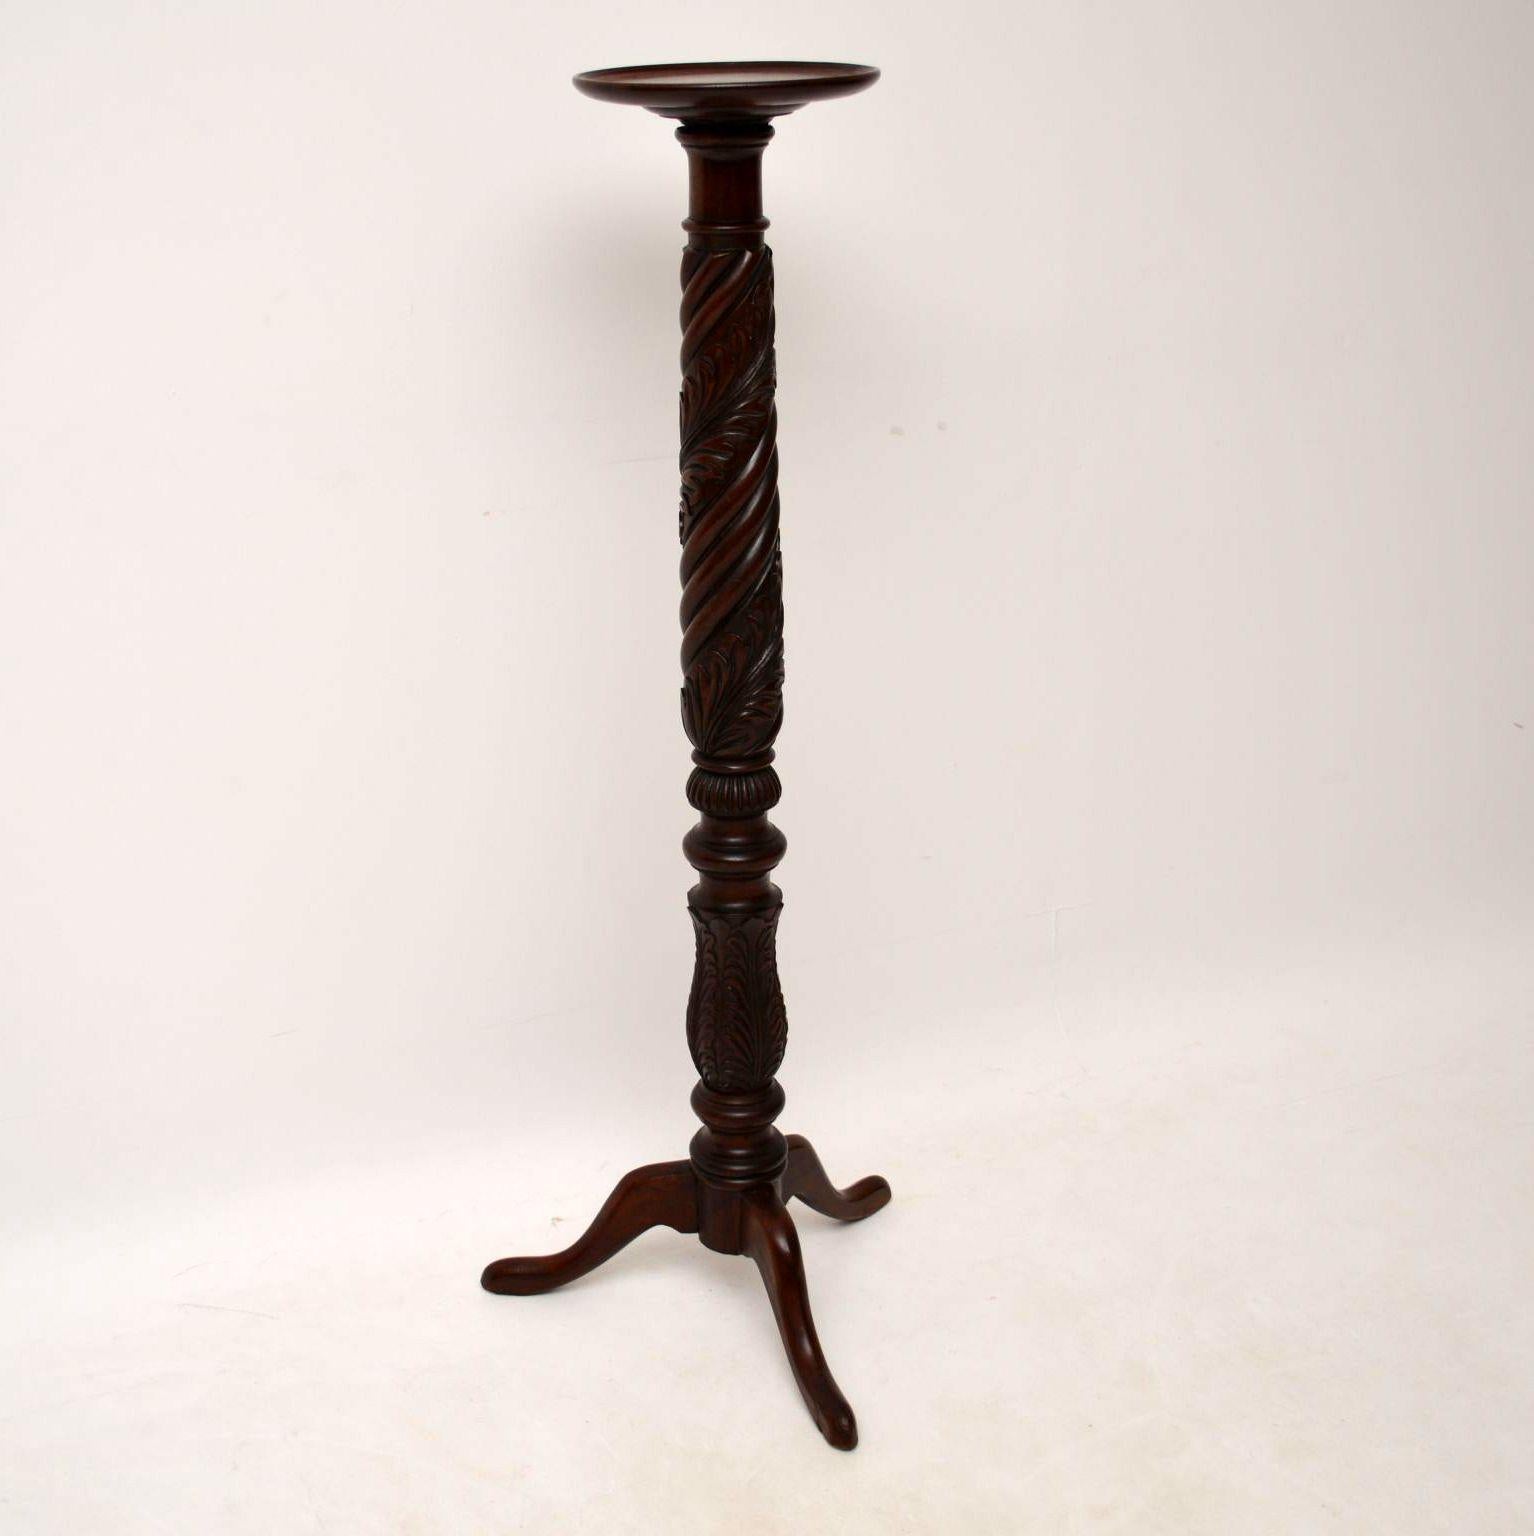 Antique solid mahogany torchere stand with abundant carvings, turnings and designs all down the stem., sitting on tripod legs. It's in excellent original condition and I would date it to circa the 1840 period.

Measures: Width 18?, 46 cm
Height